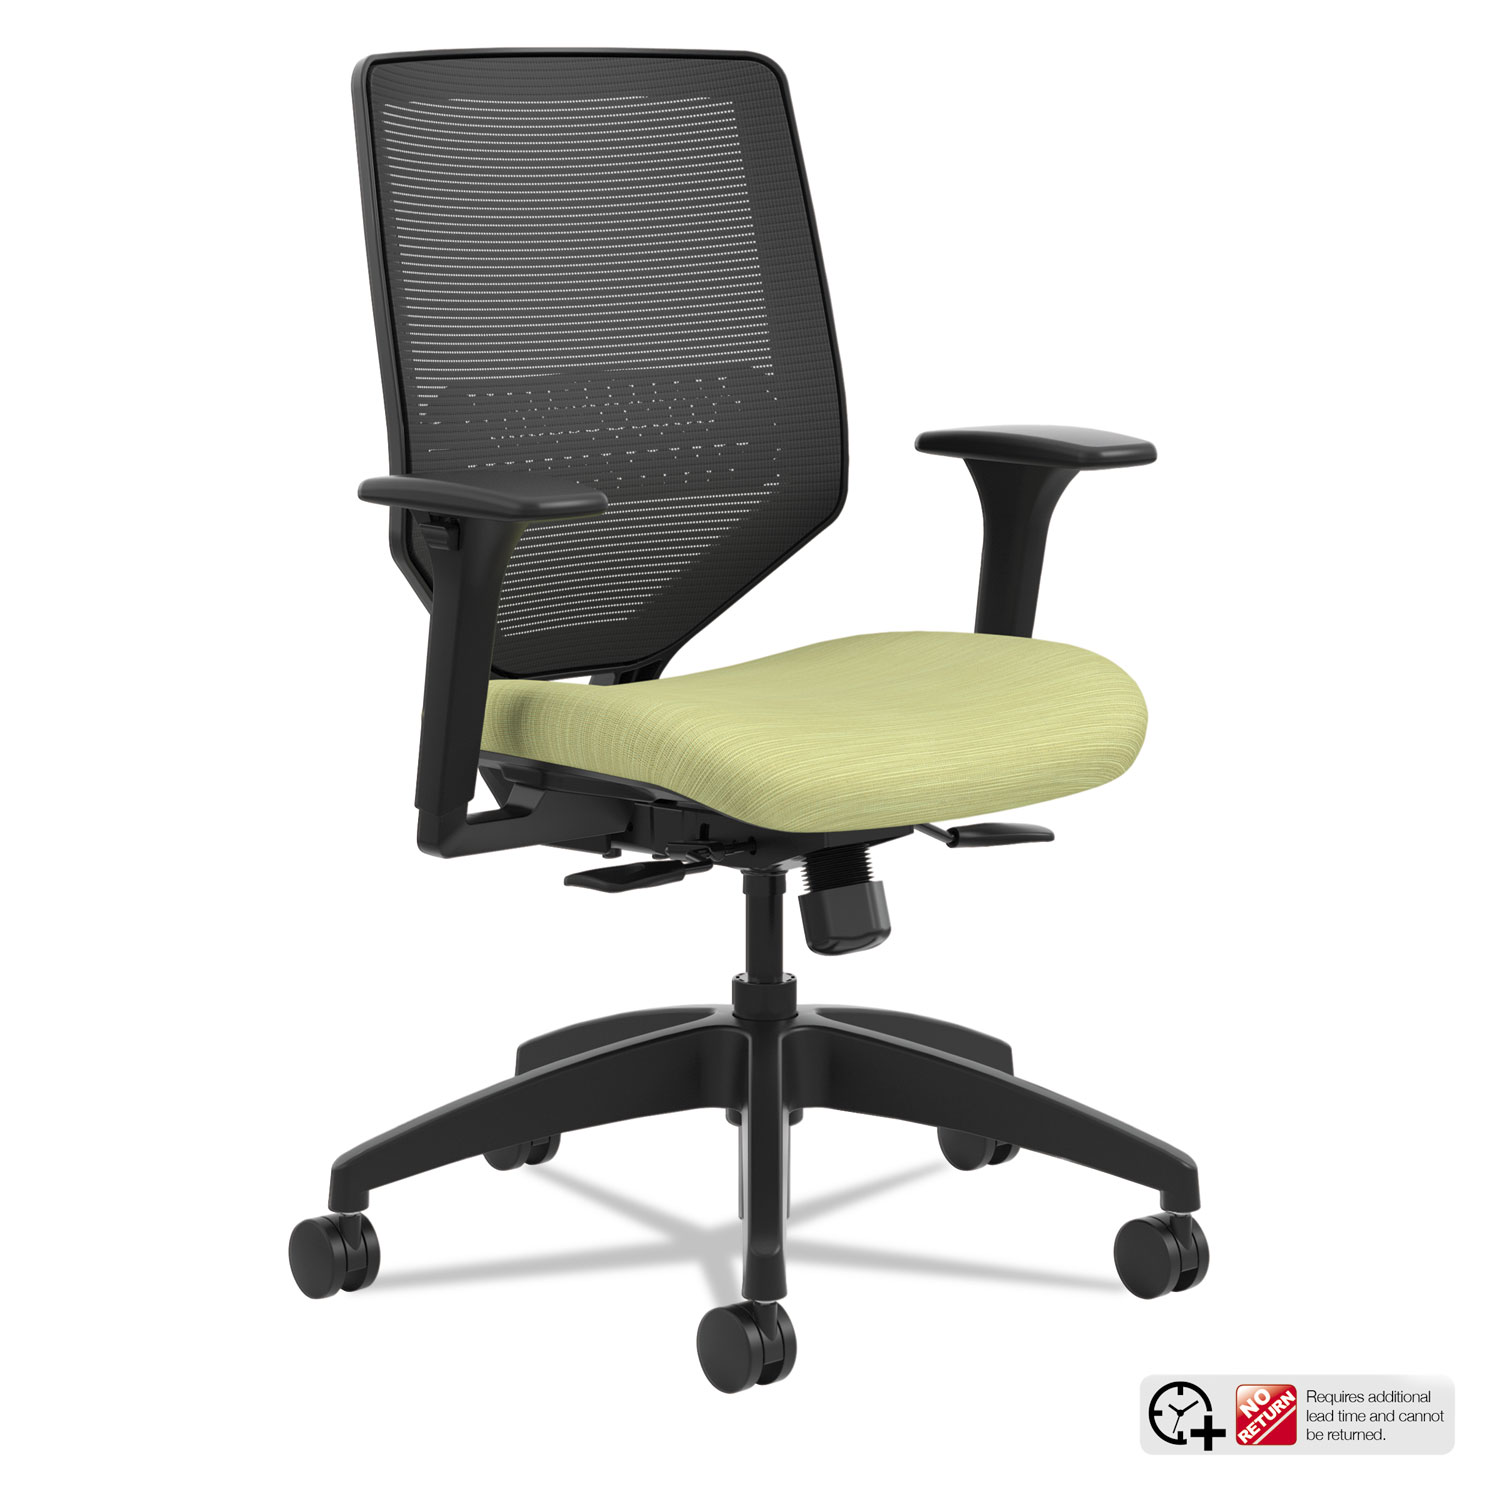  HON SVM1ALC82TK Solve Series Mesh Back Task Chair, Supports up to 300 lbs., Meadow Seat, Black Back, Black Base (HONSVM1ALC82TK) 